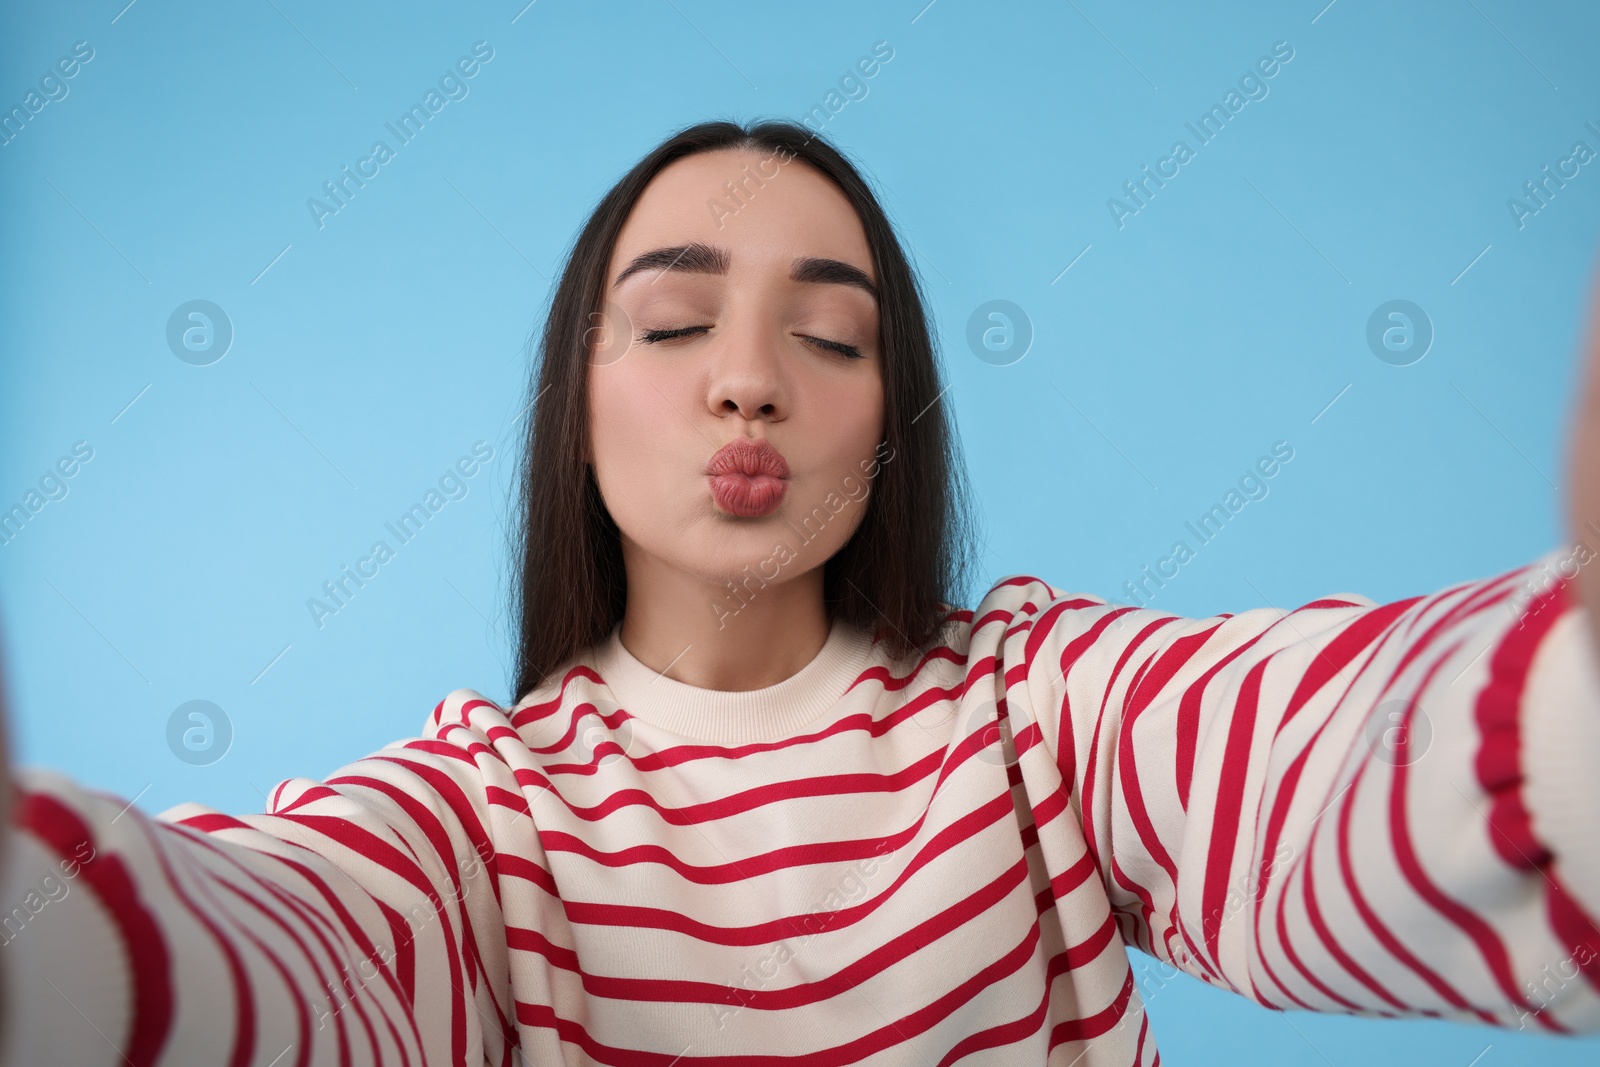 Photo of Young woman taking selfie and blowing kiss on light blue background